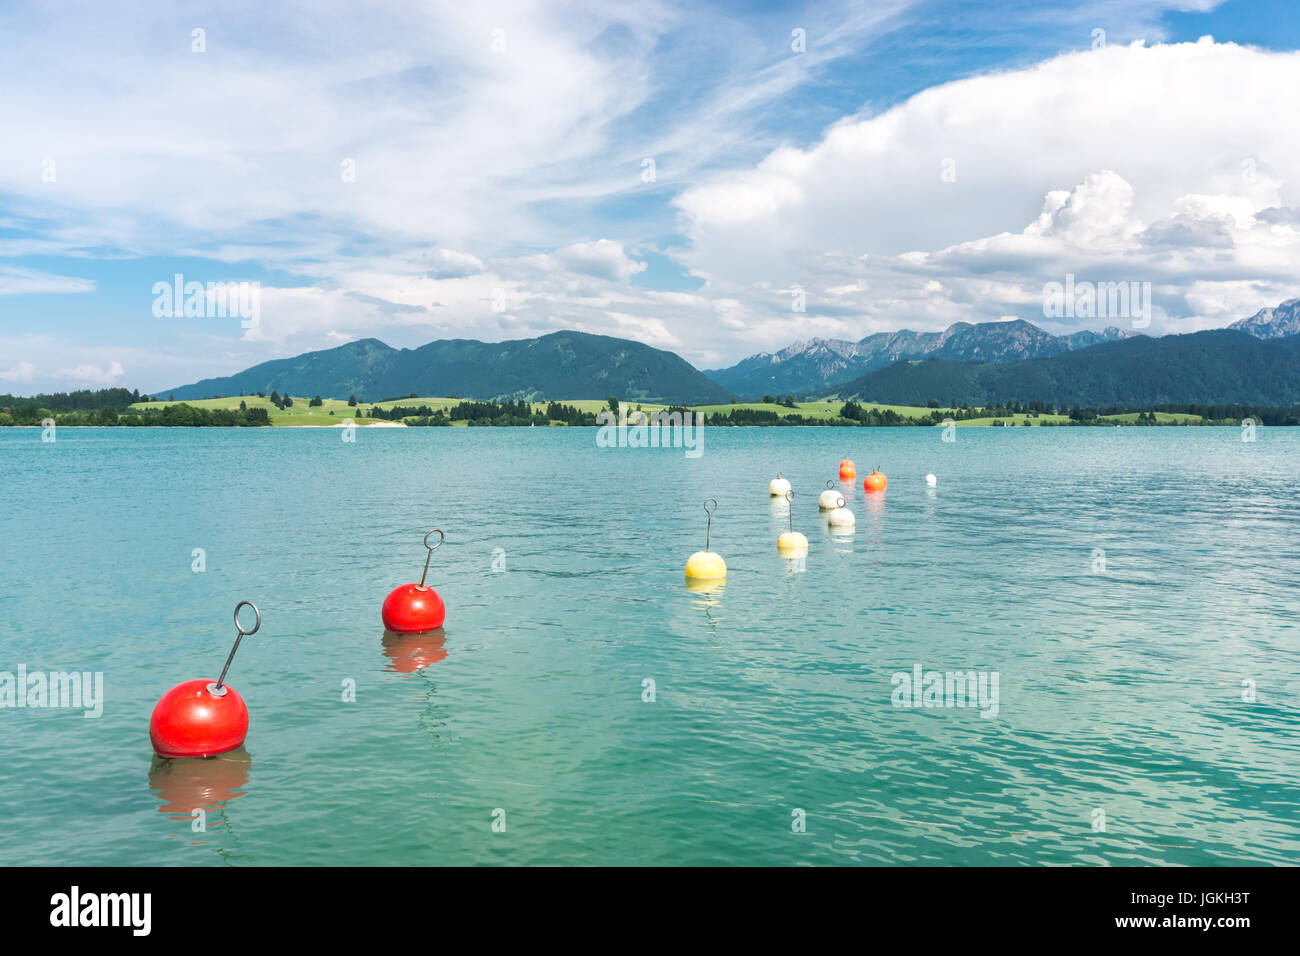 Marker buoys on surface of water. Mountains and thundery clouds. Stock Photo